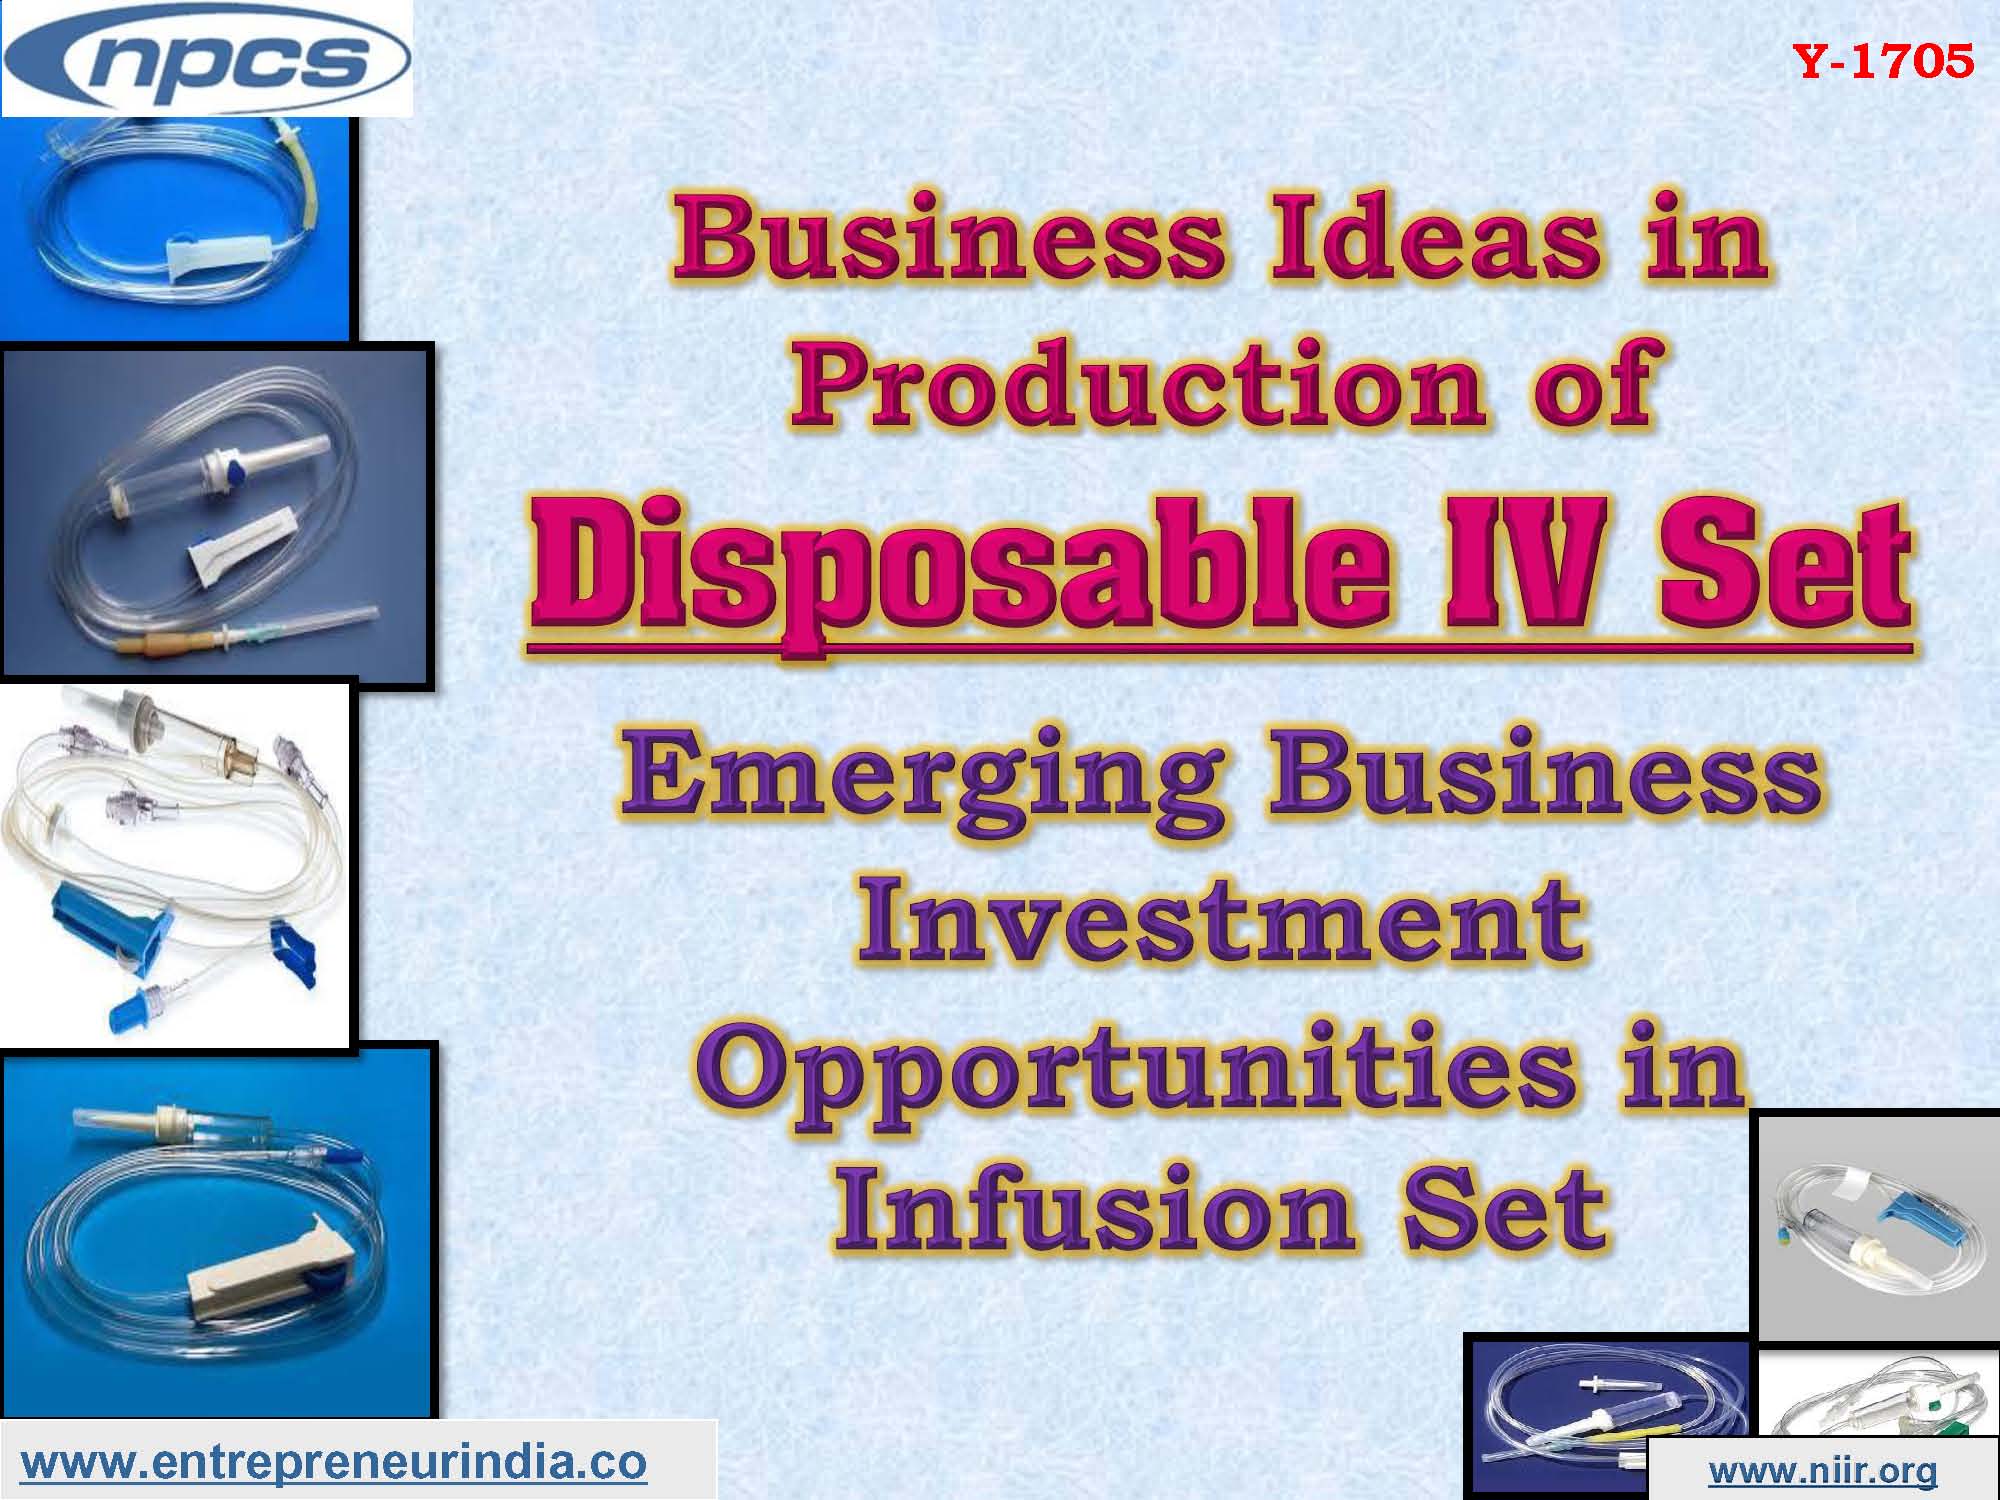 Business Ideas in Production of Disposable IV Set